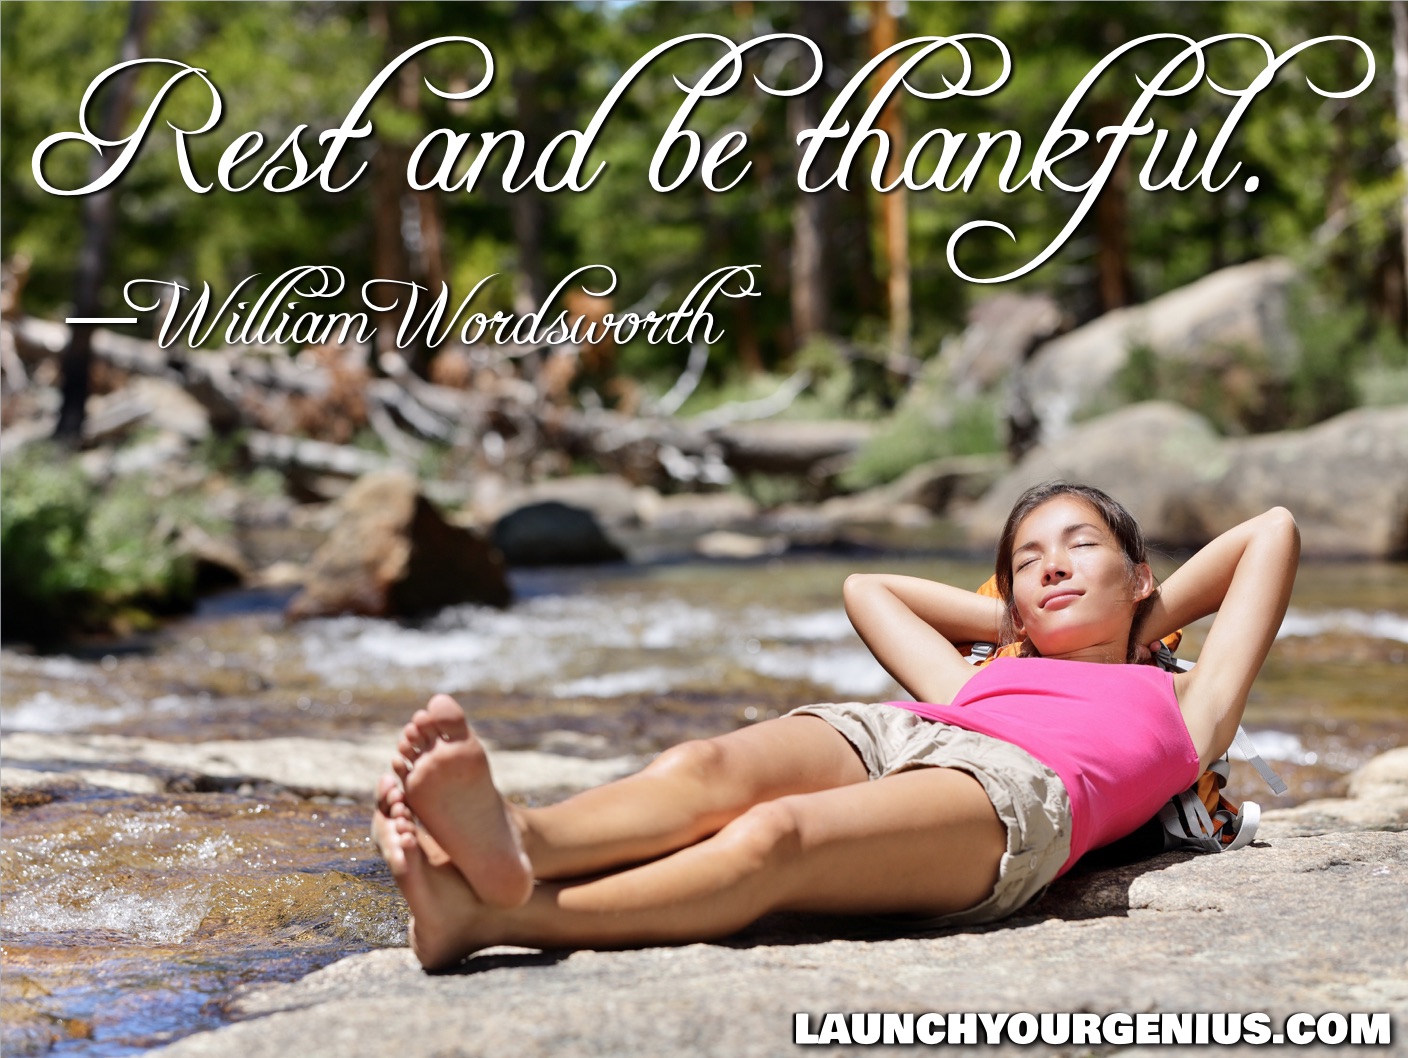 rest-and-be-thankful